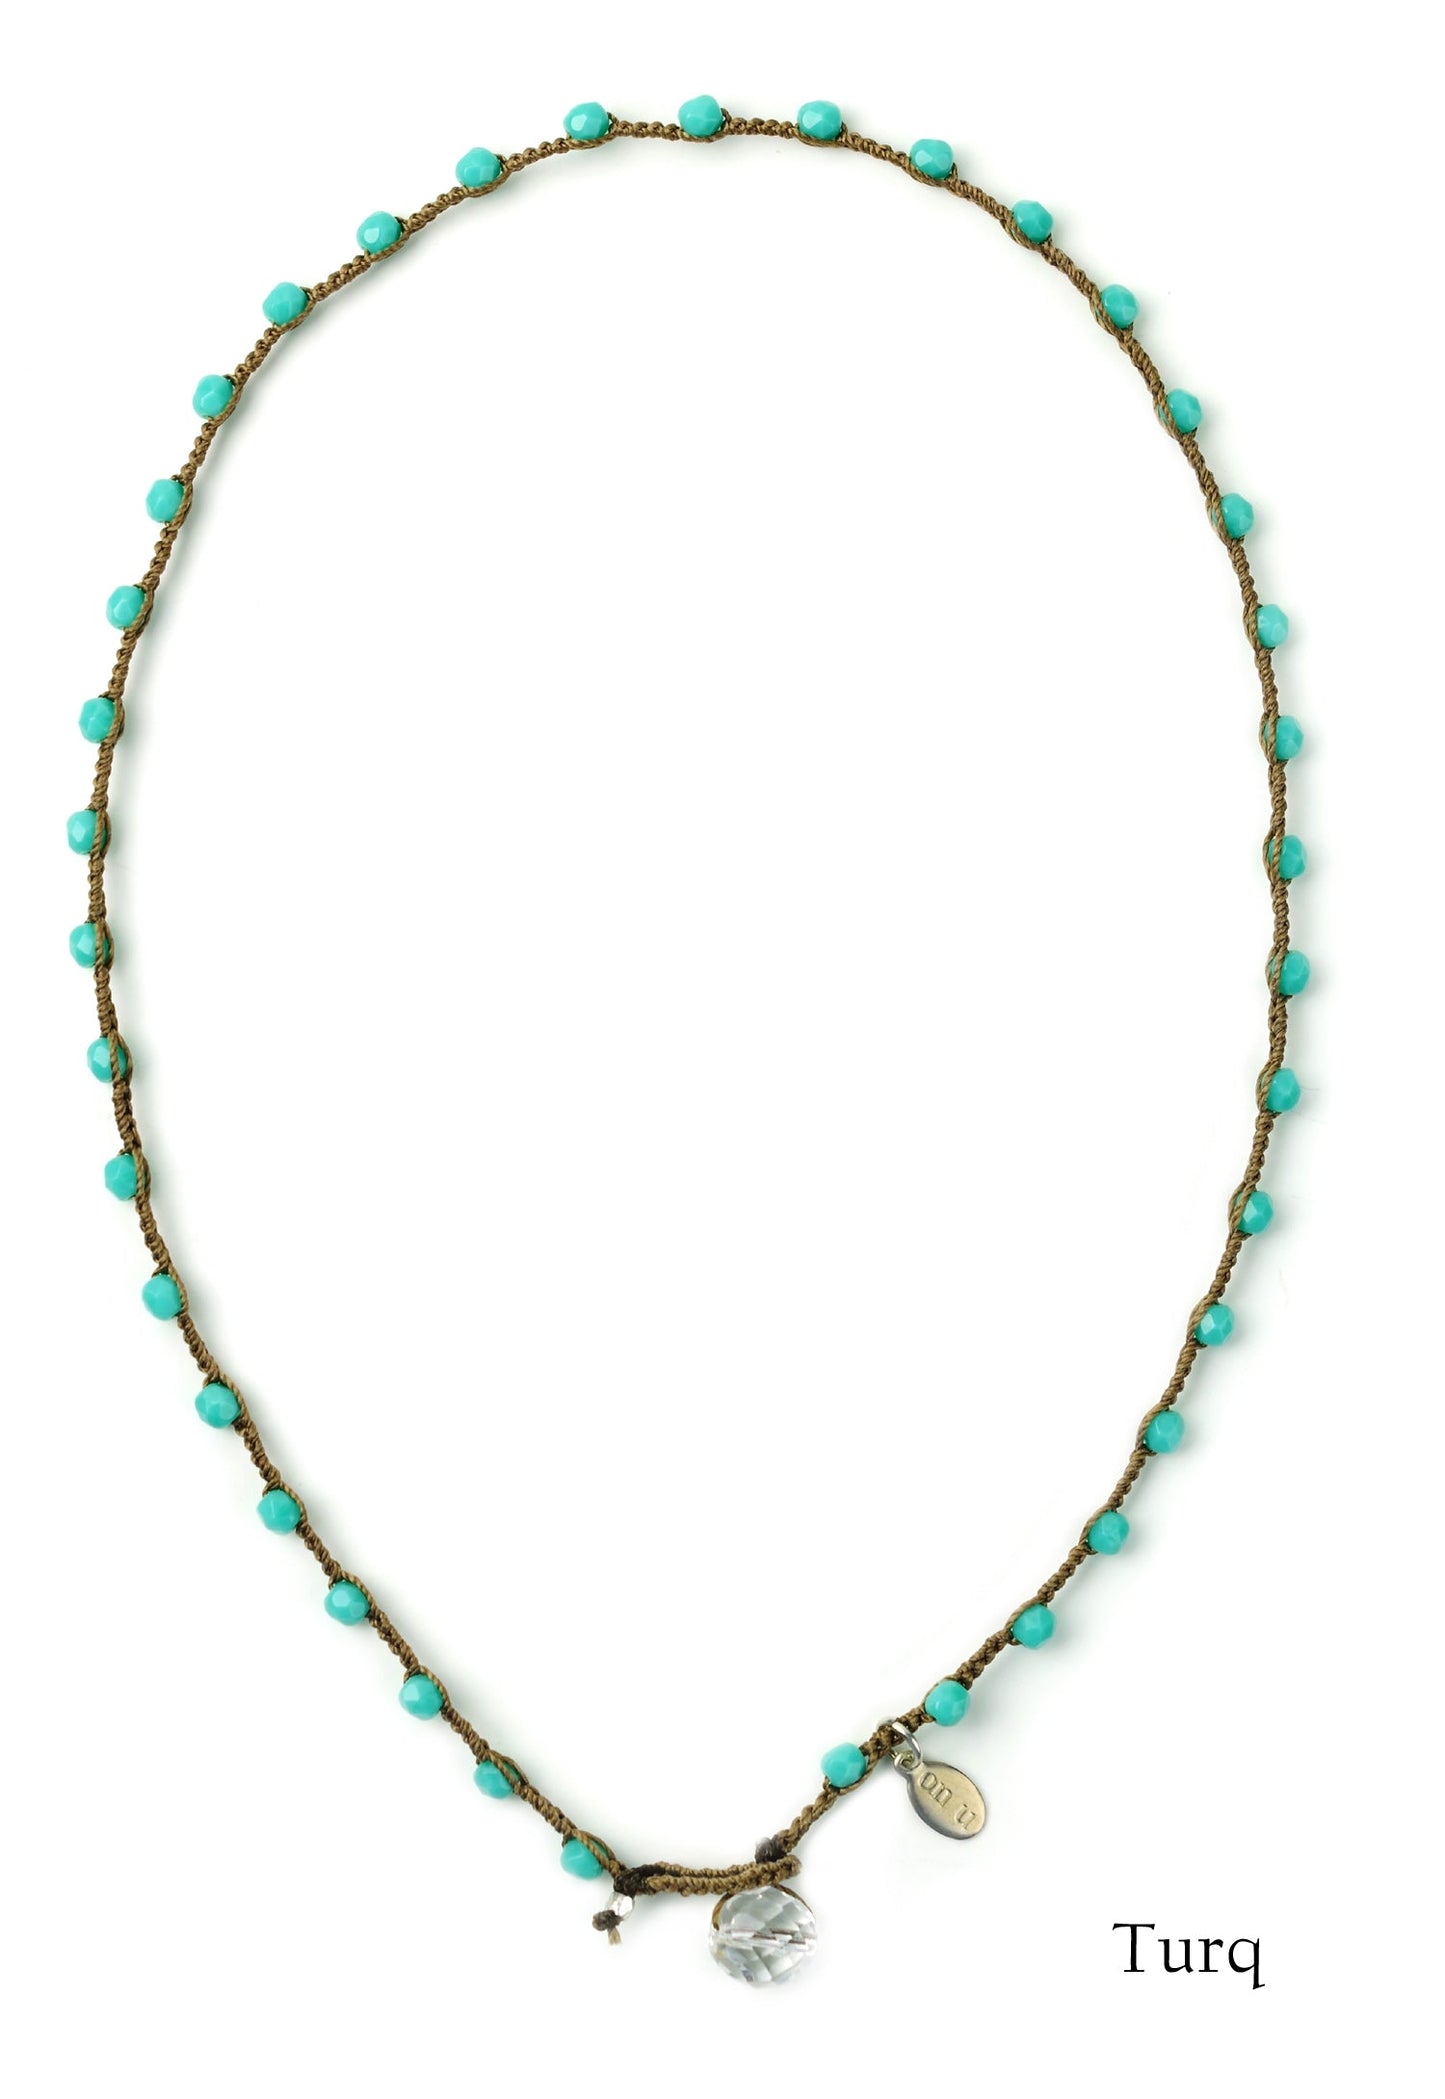 onujewelry.com - Small Bead Dot Necklace in Turquoise.  Designed, and created, by Donna Silvestri, On U Jewelry, Richmond, VA